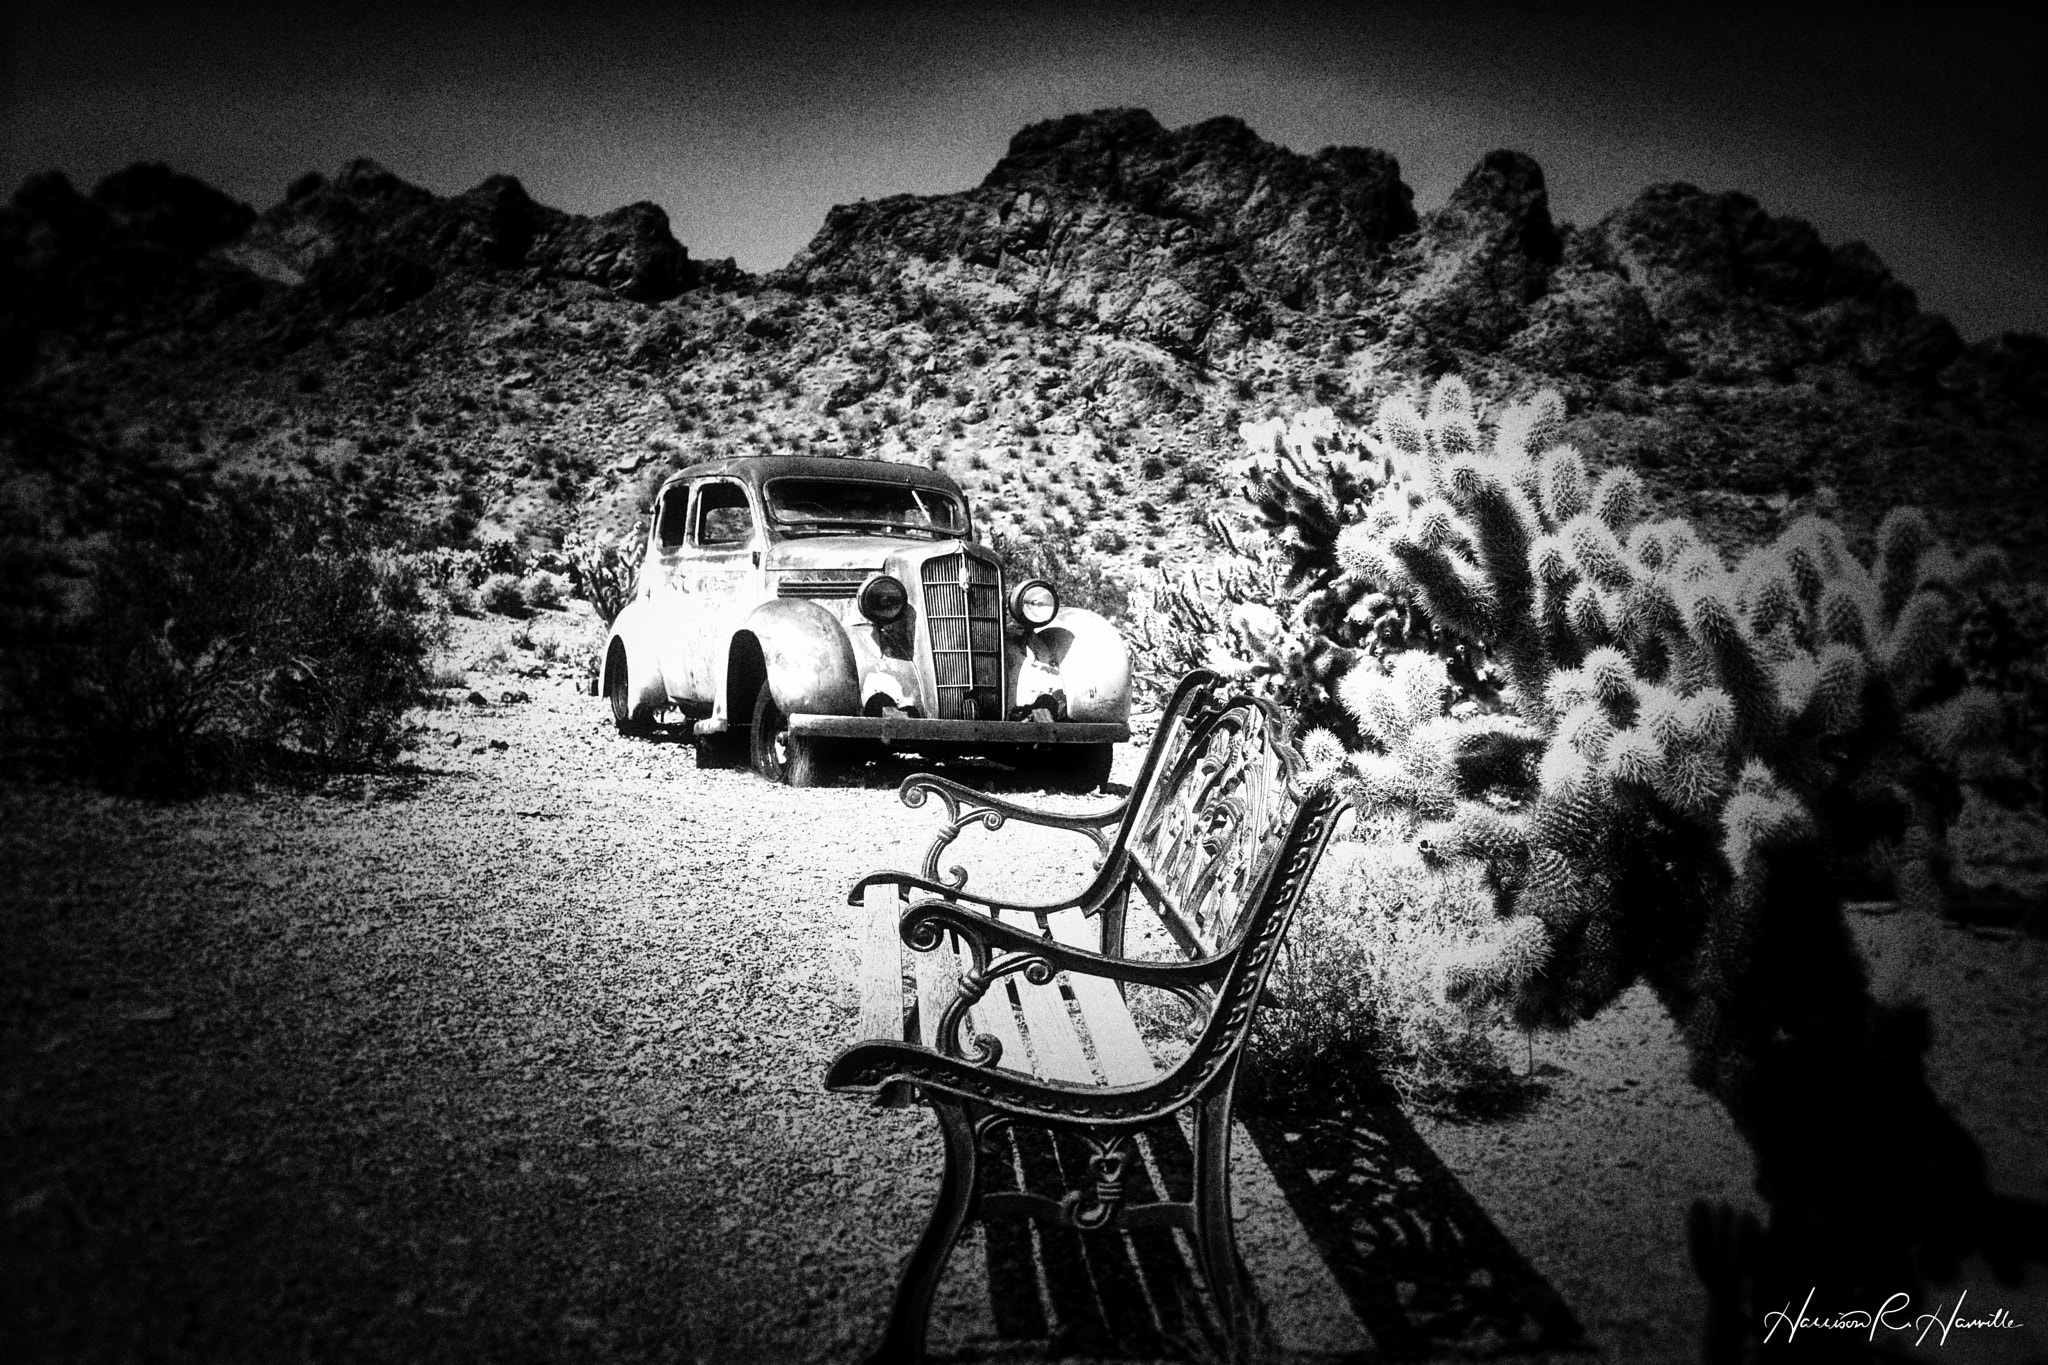 Hasselblad Lunar sample photo. Bench seat photography